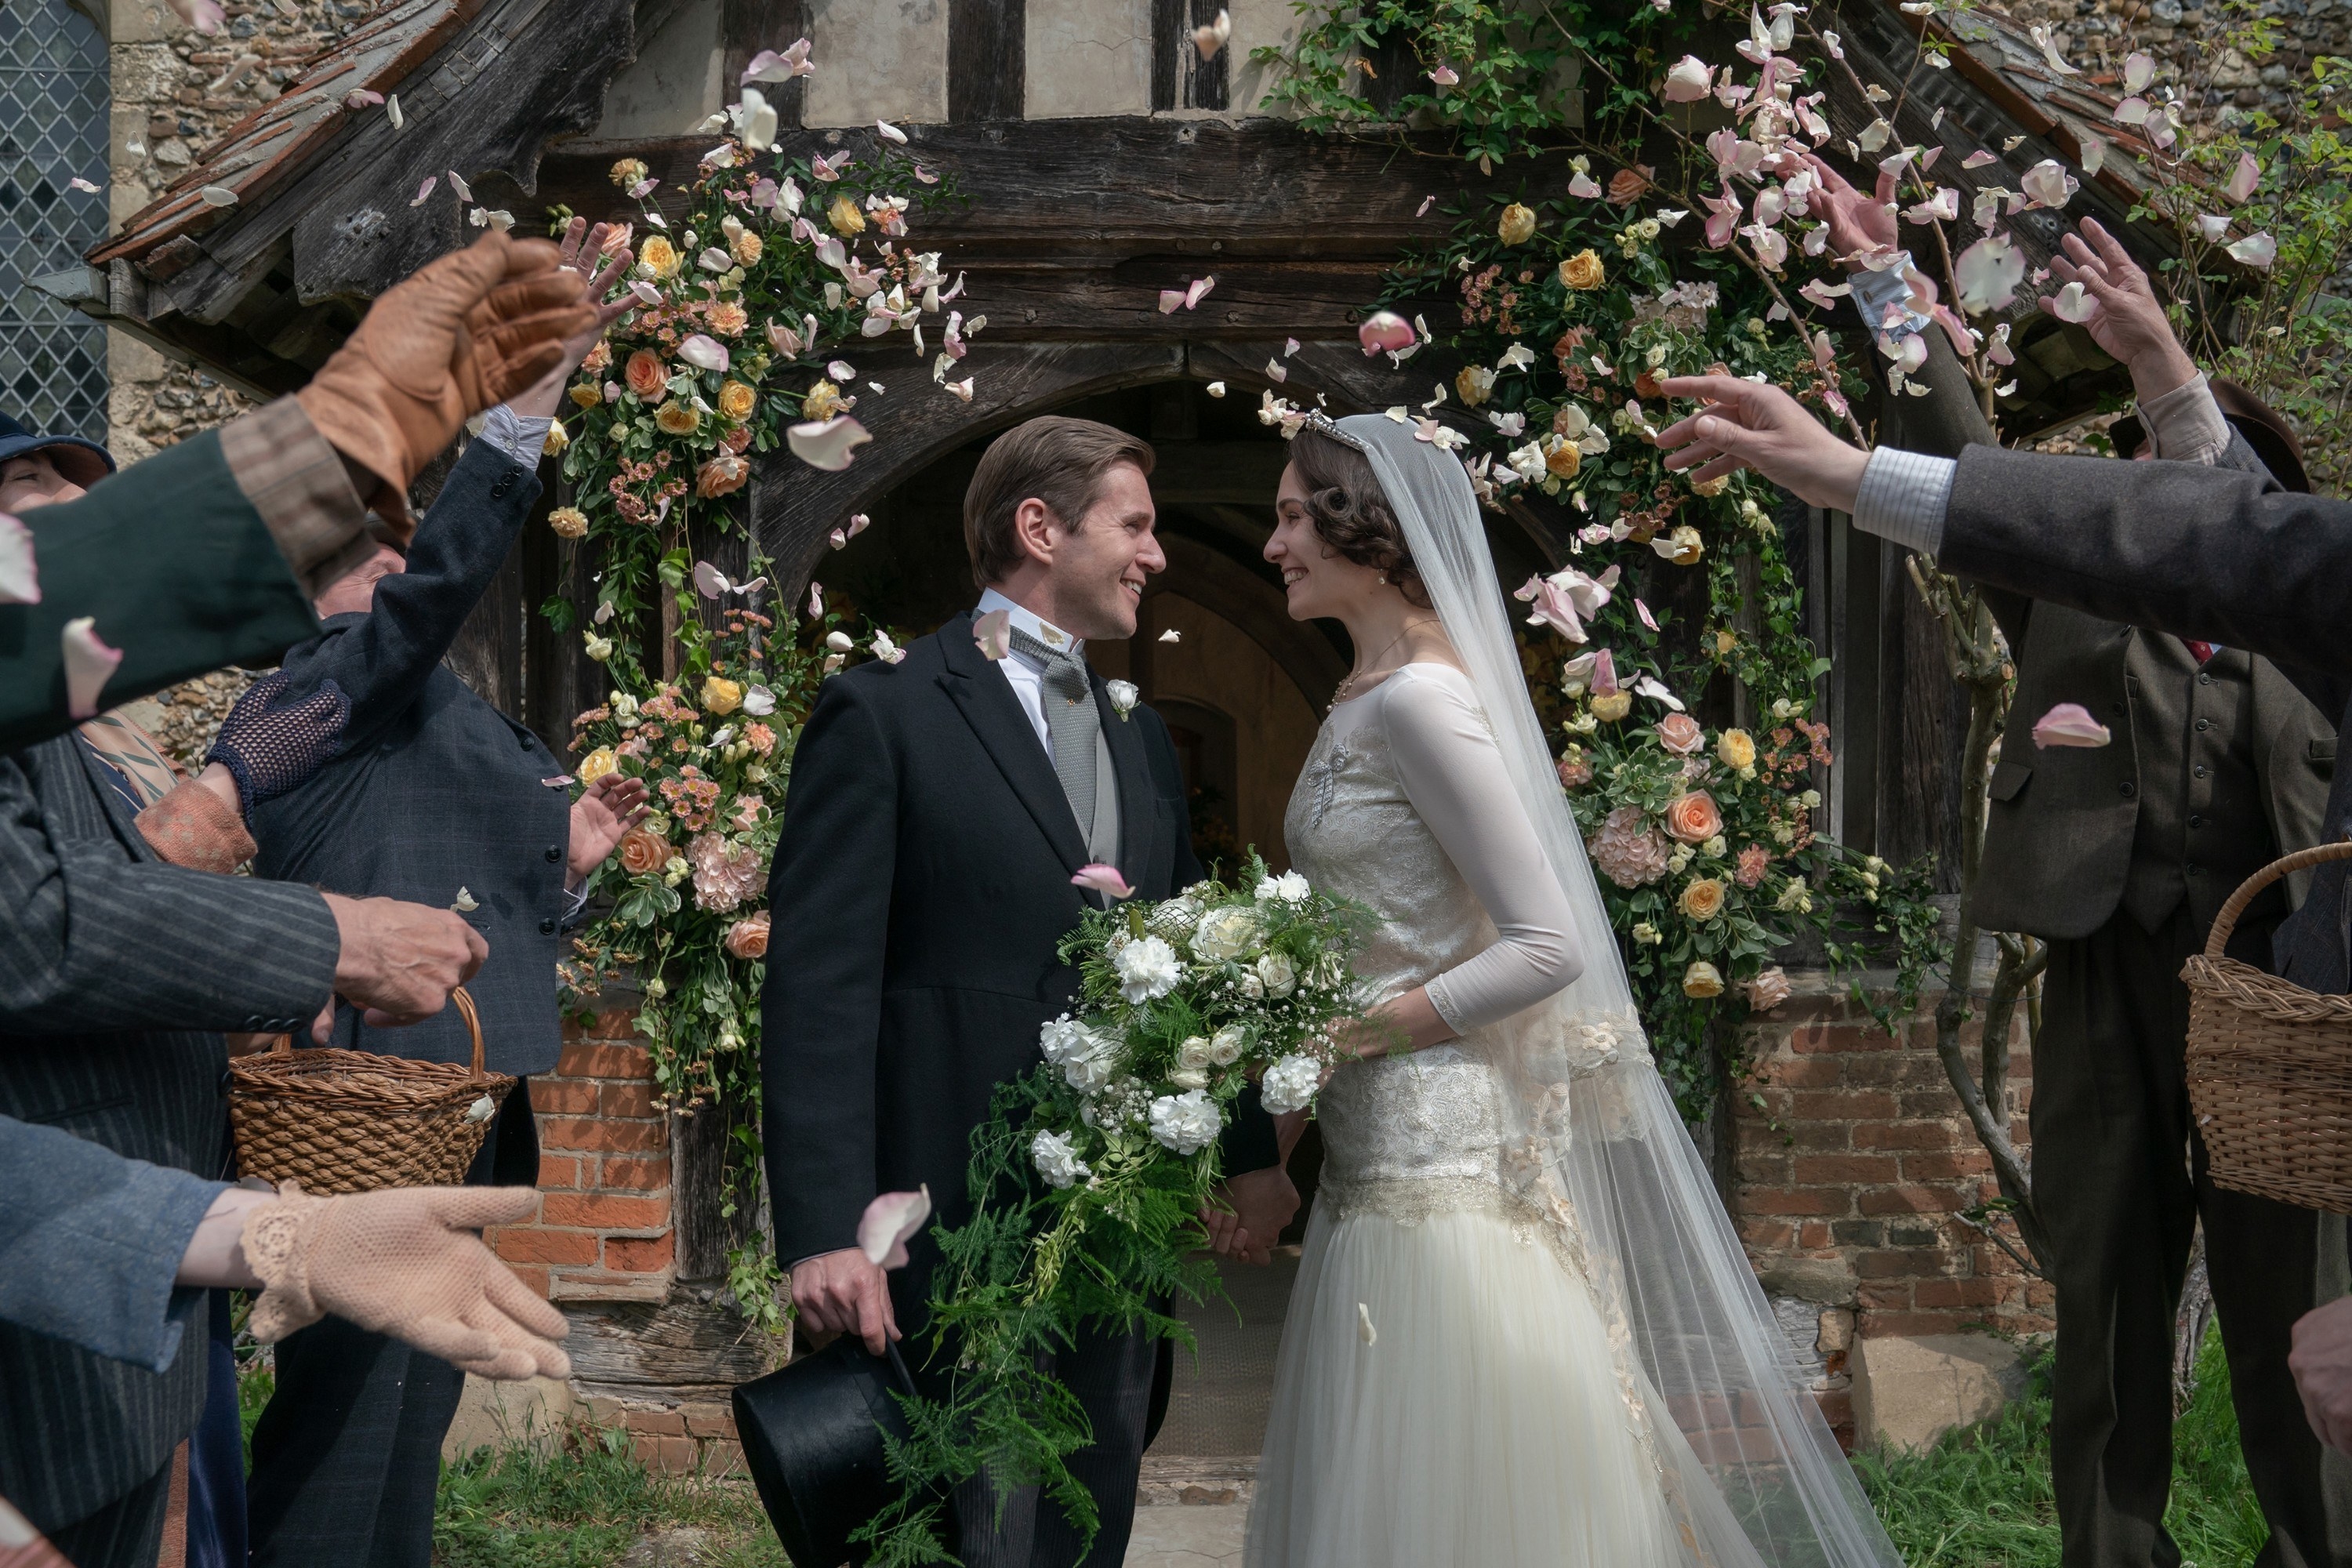 A wedding scene from &quot;Downton Abbey: A New Era&quot;